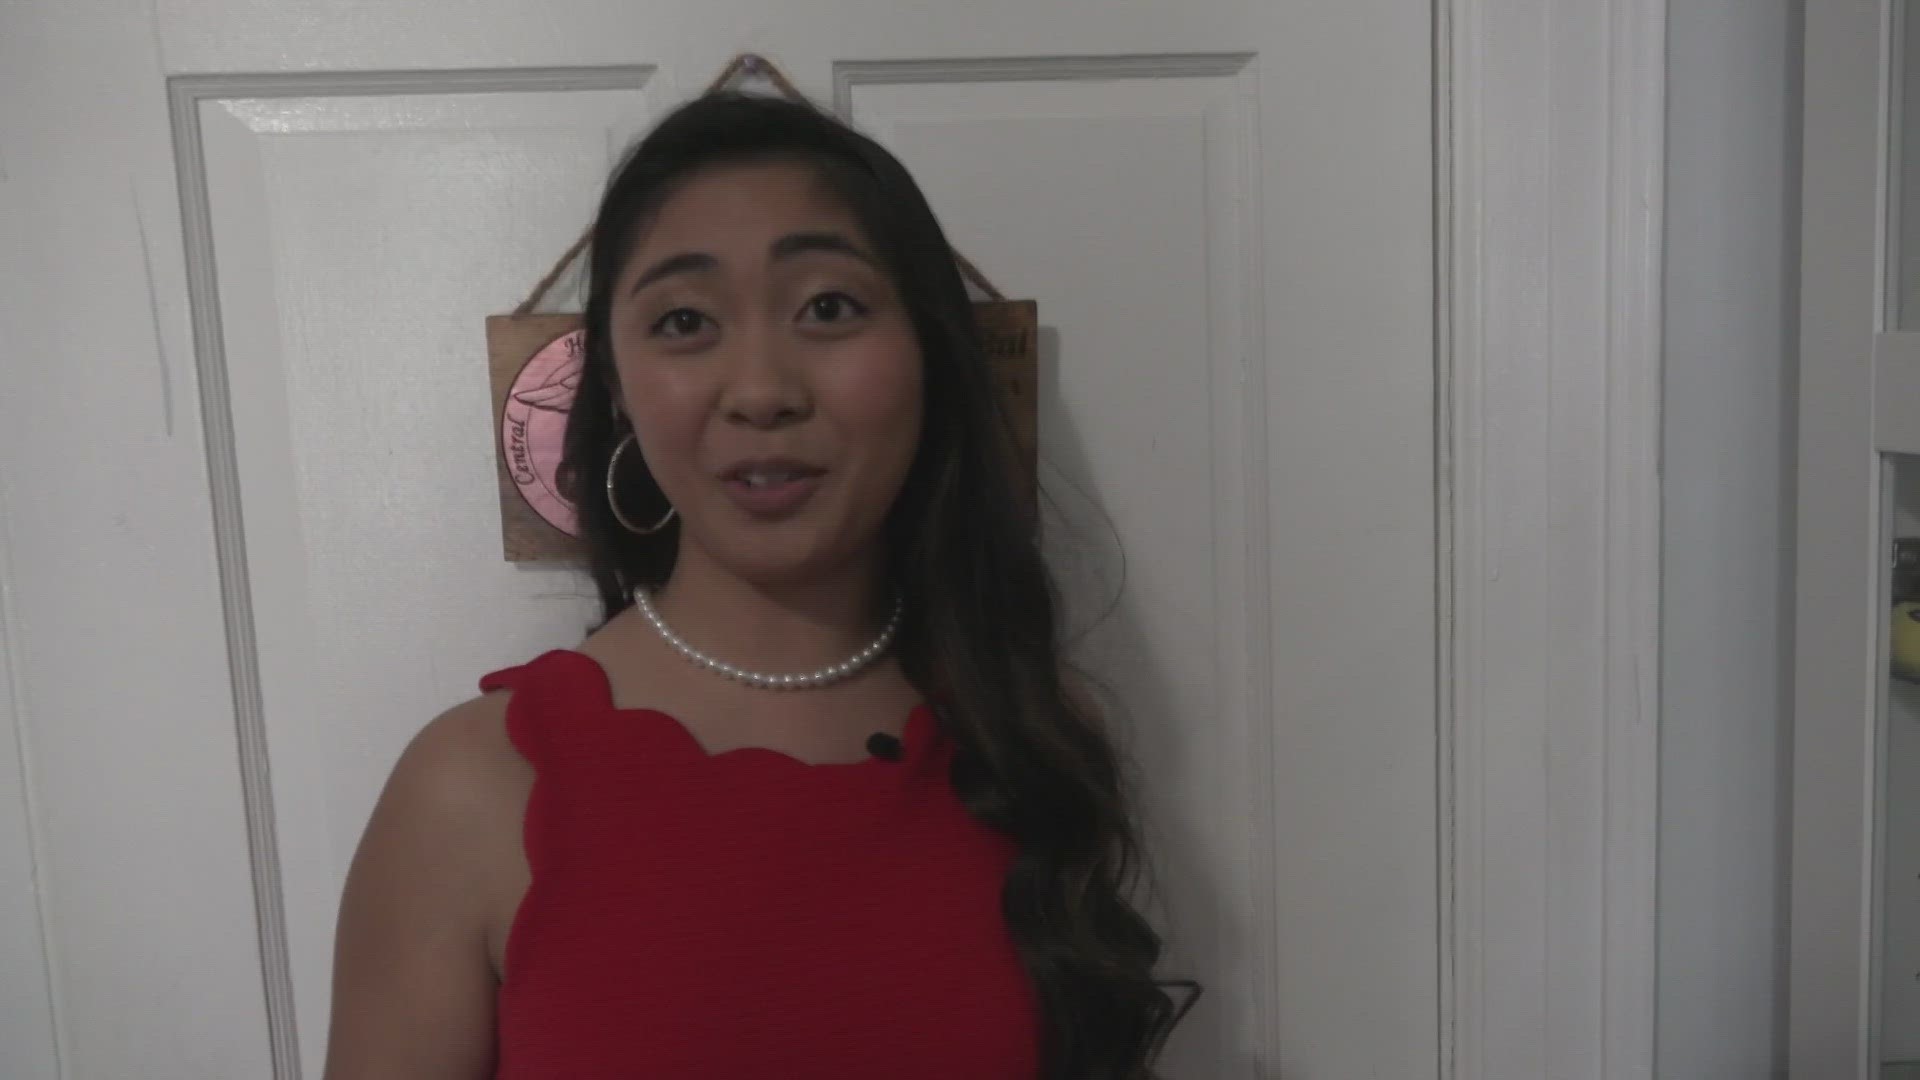 Sarah Nguyen is well ahead of schedule. She’s preparing to go to college after finishing high school as a 15-year-old.